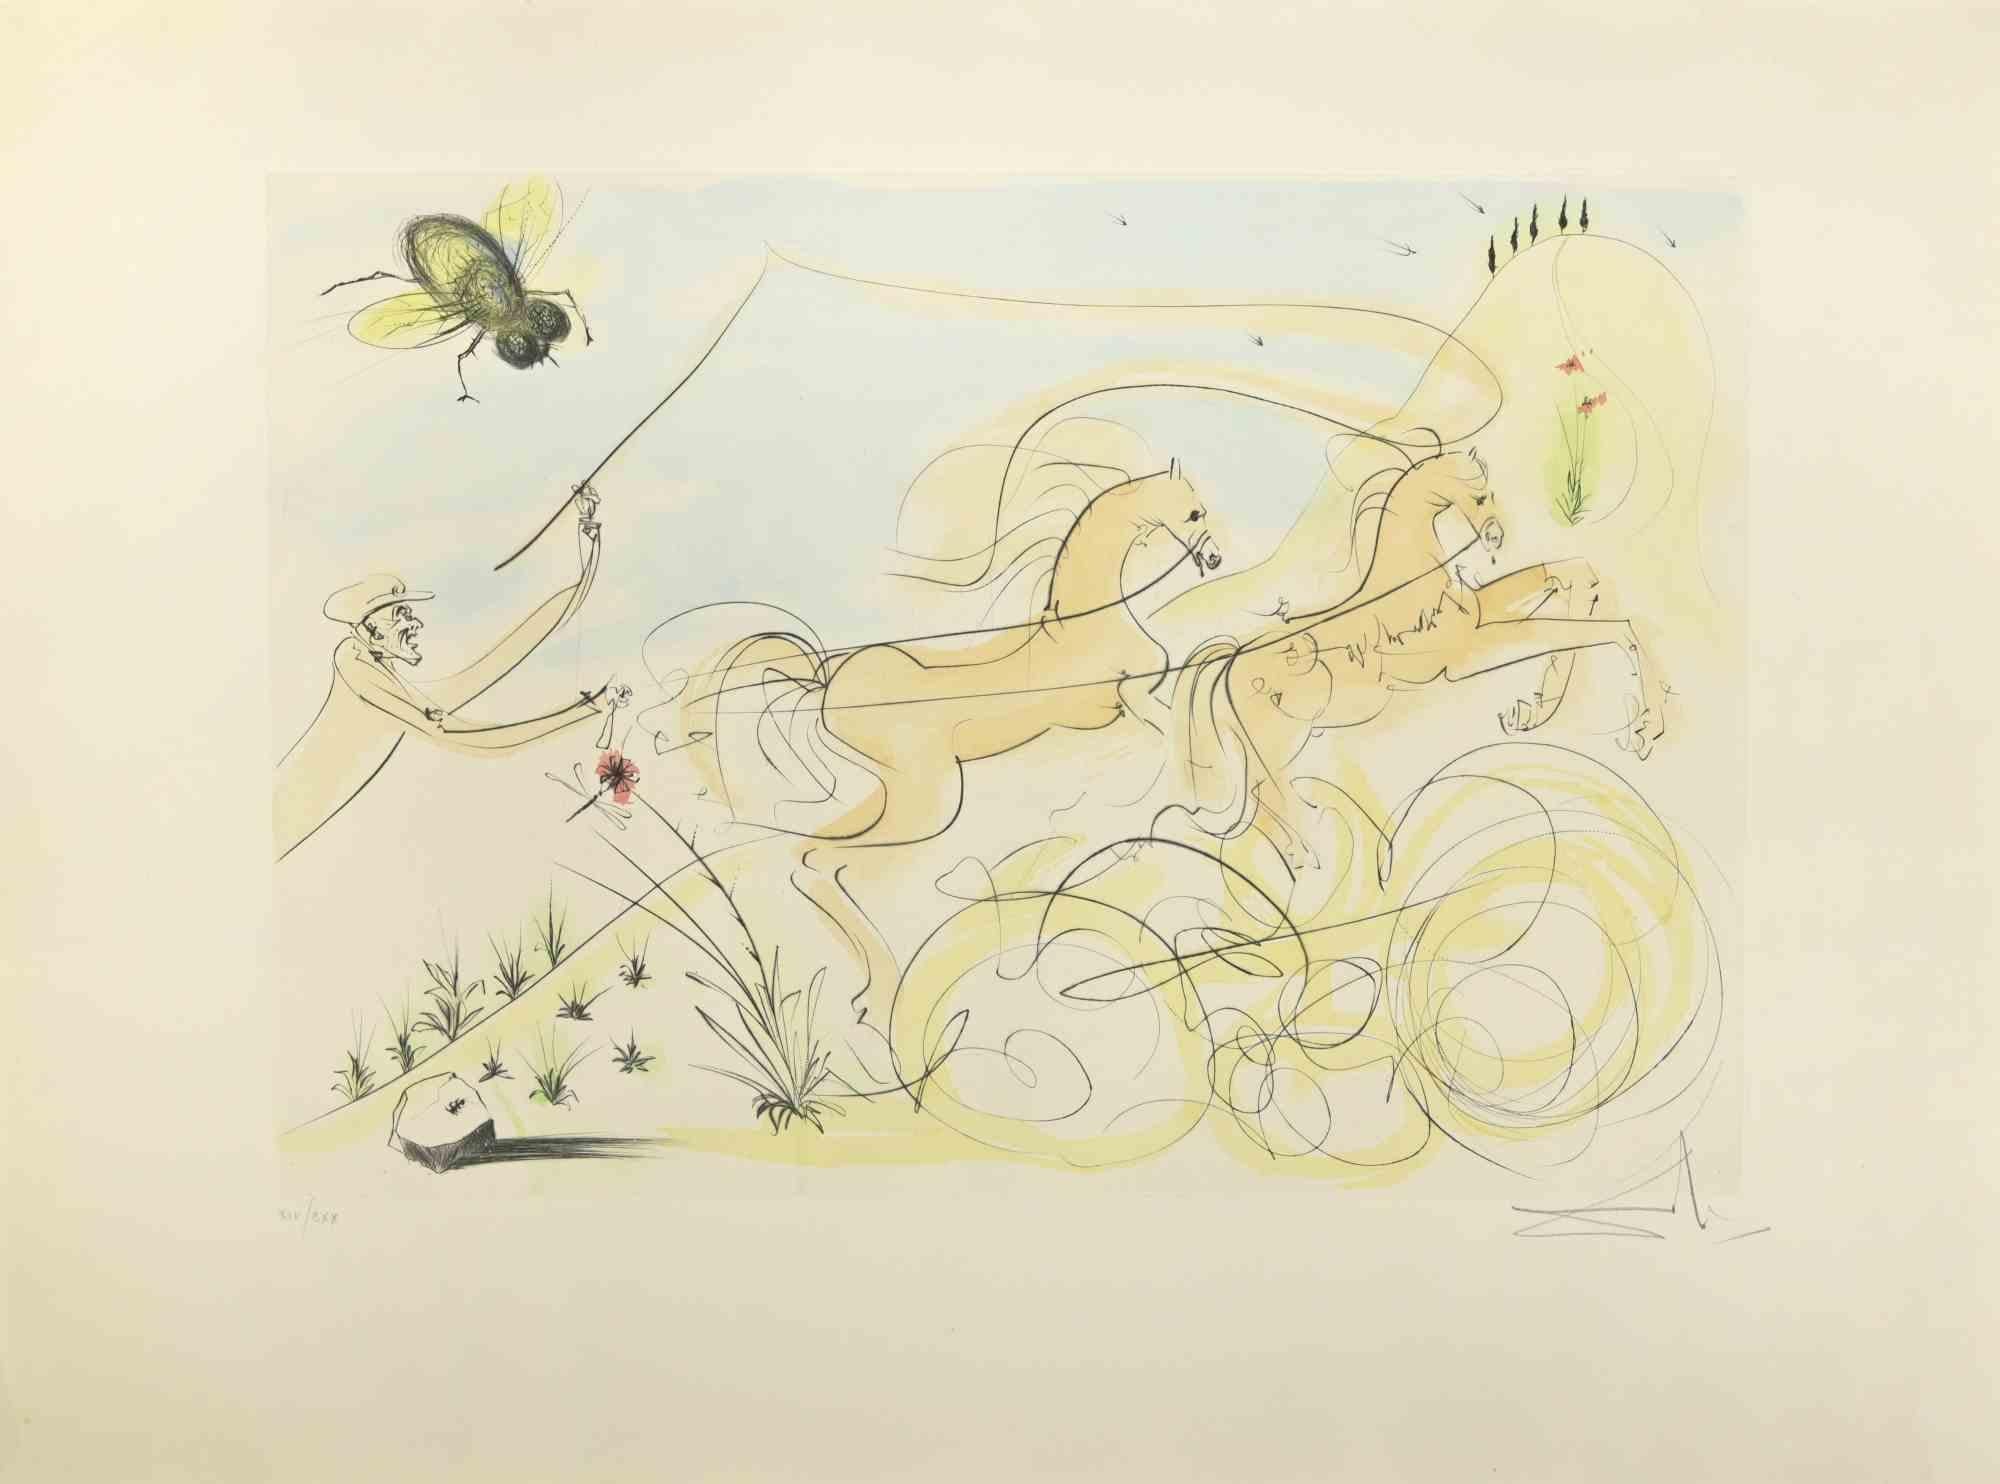 Salvador Dalí Animal Print - The Coach and the Flies - Etching  - 1974